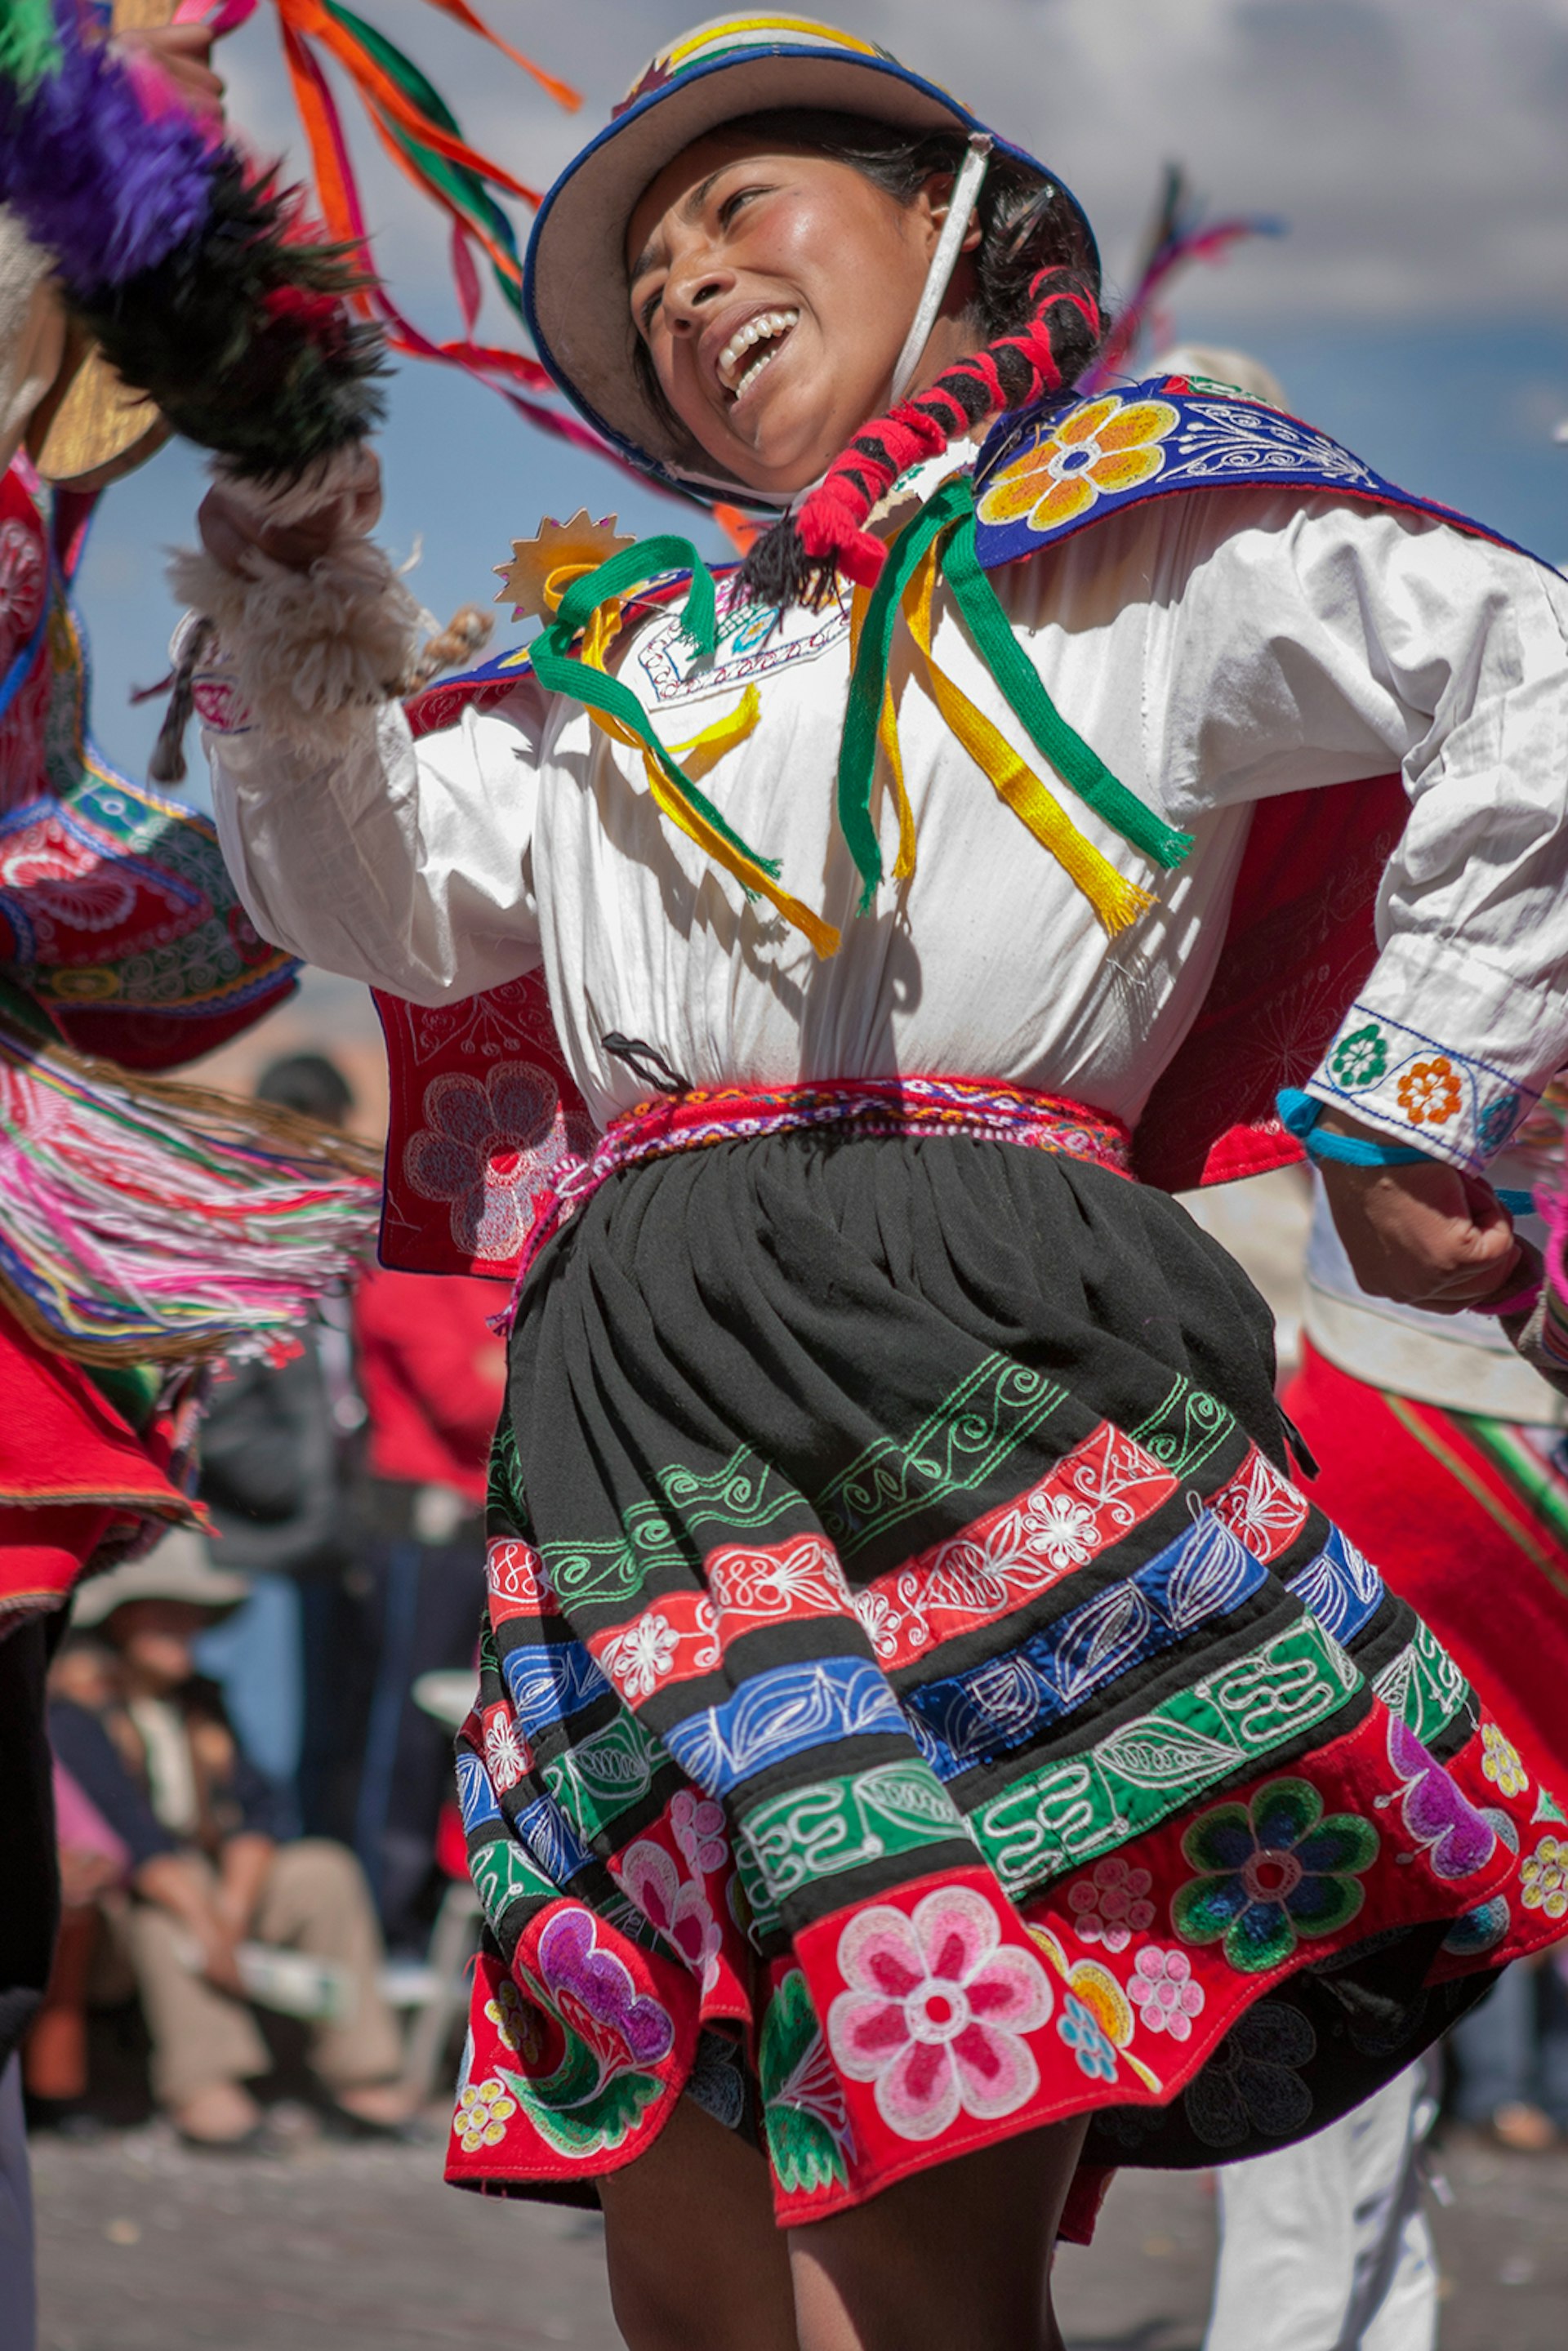 A woman wearing a colorful traditional Inca skirt and a white blouse dances in Plaza de Armas, Cuzco, Peru